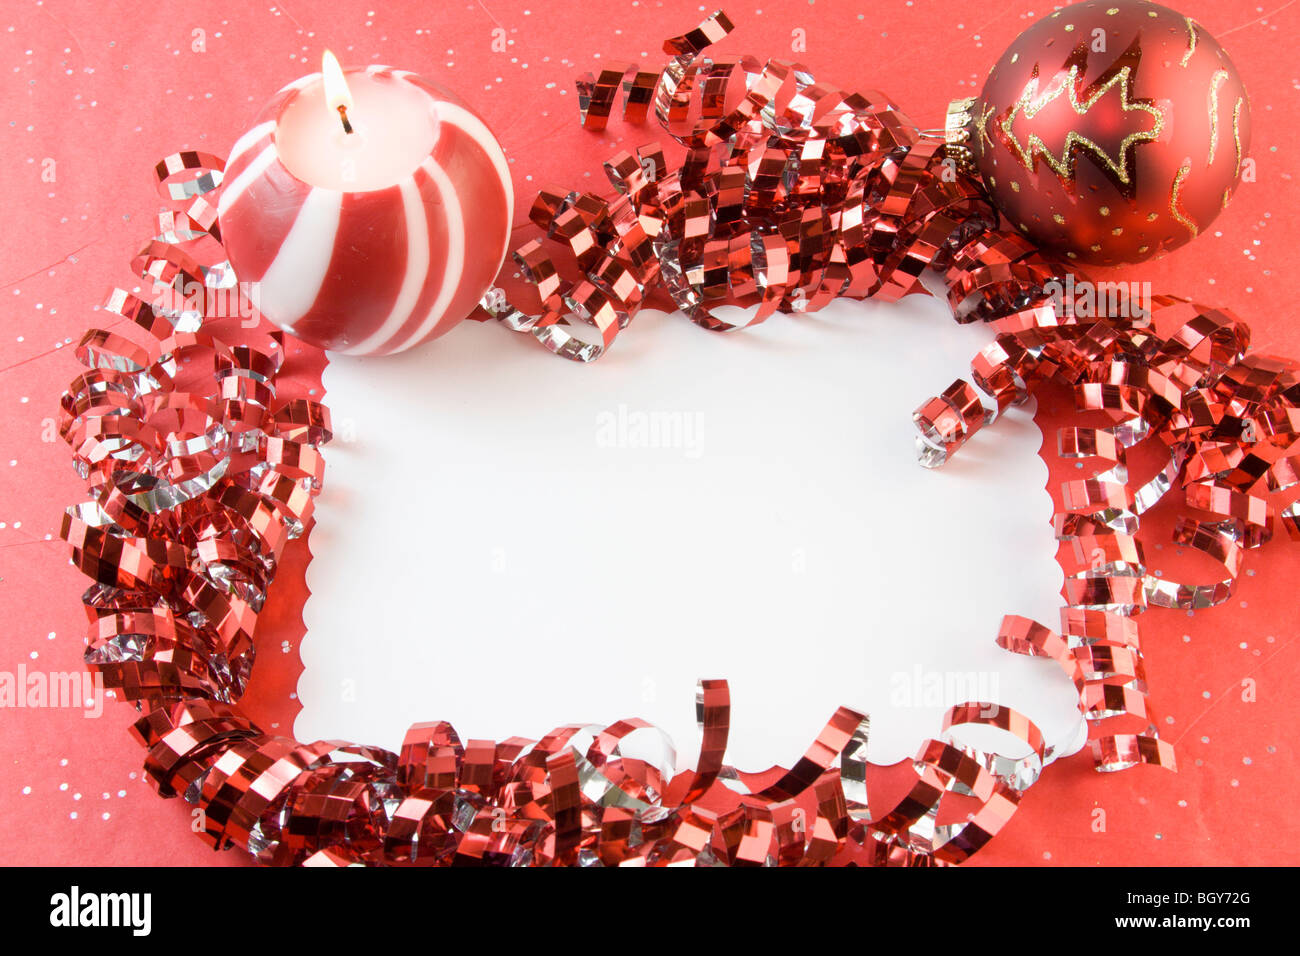 blank Christmas card with metallic red ribbon, candle, bauble and copyspace Stock Photo